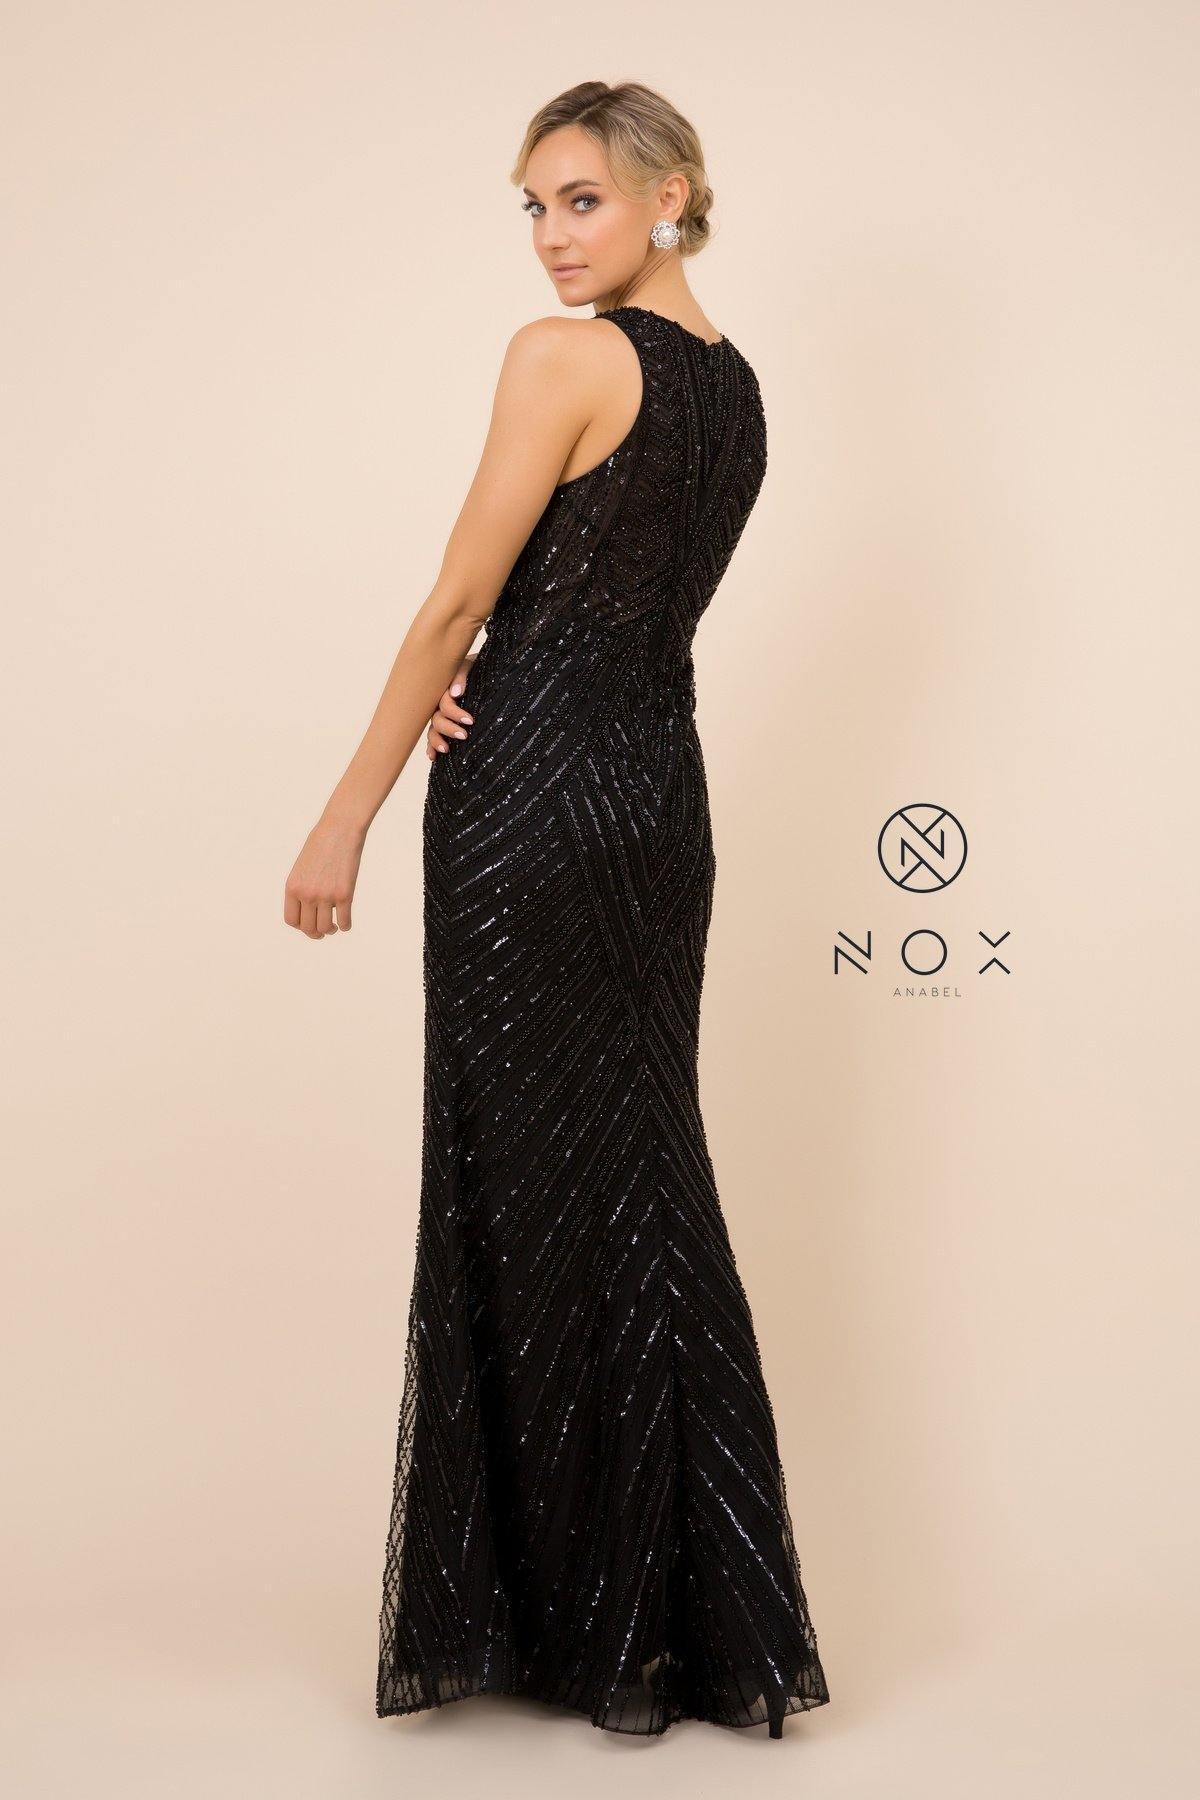 Formal Long Evening Dress Prom Gown Sale - The Dress Outlet